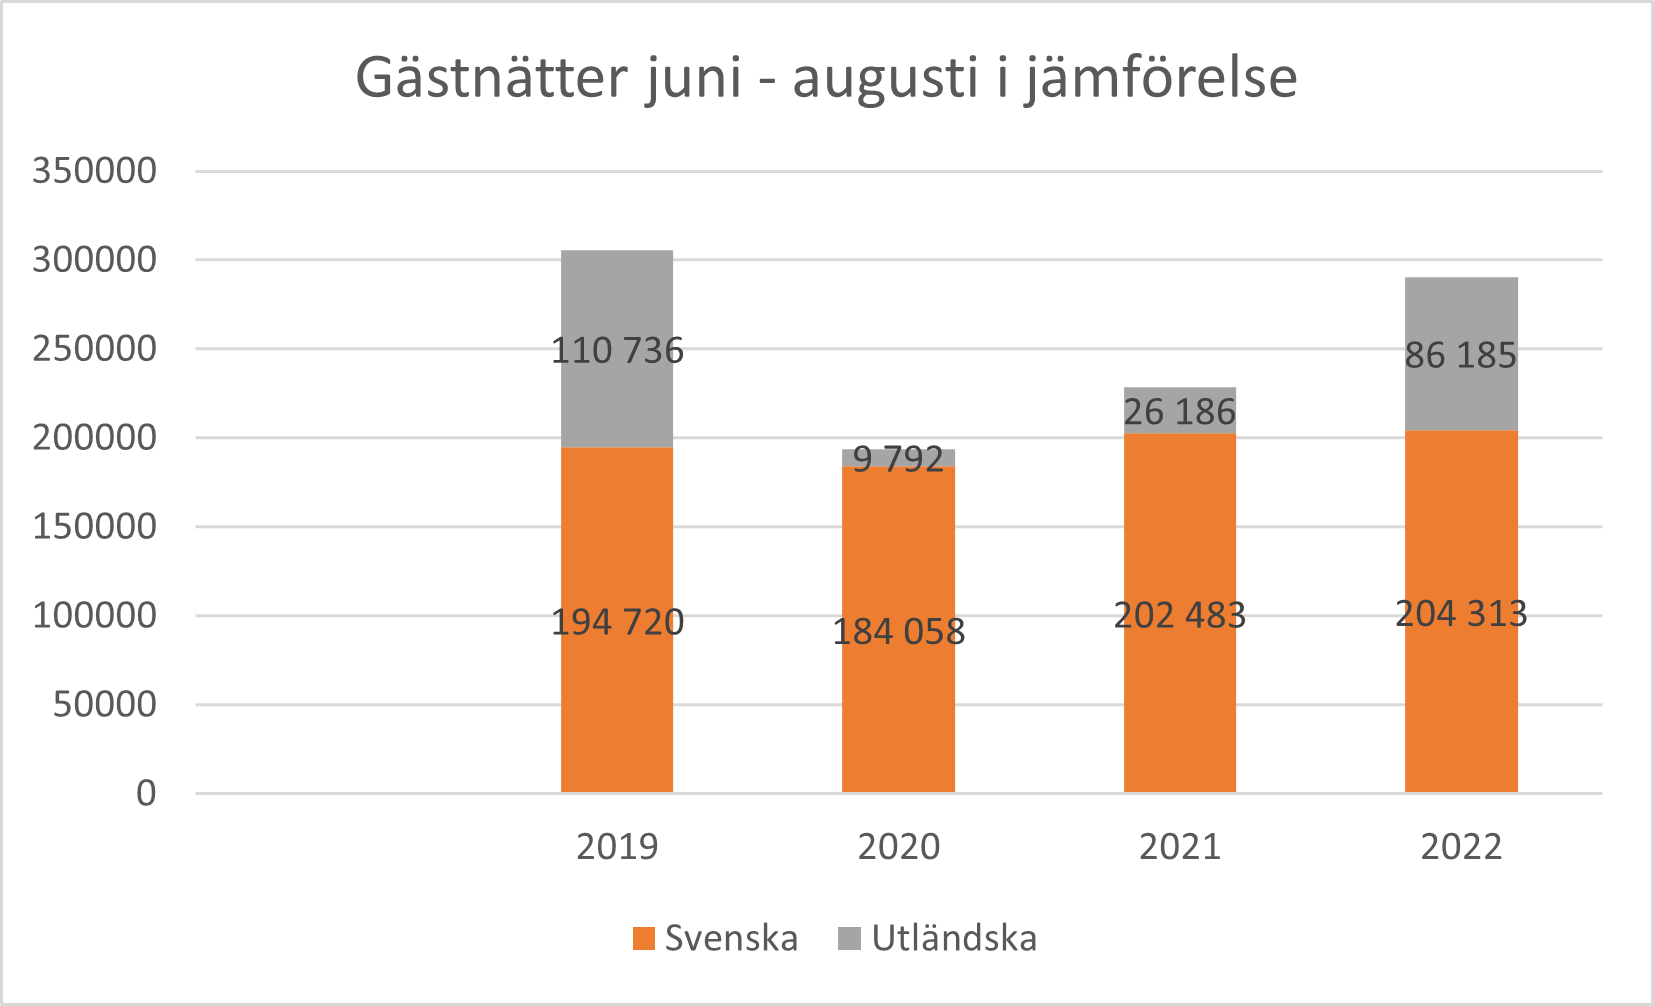 772 G%c3%a4stn%c3%a4tter juniTOMaugusti